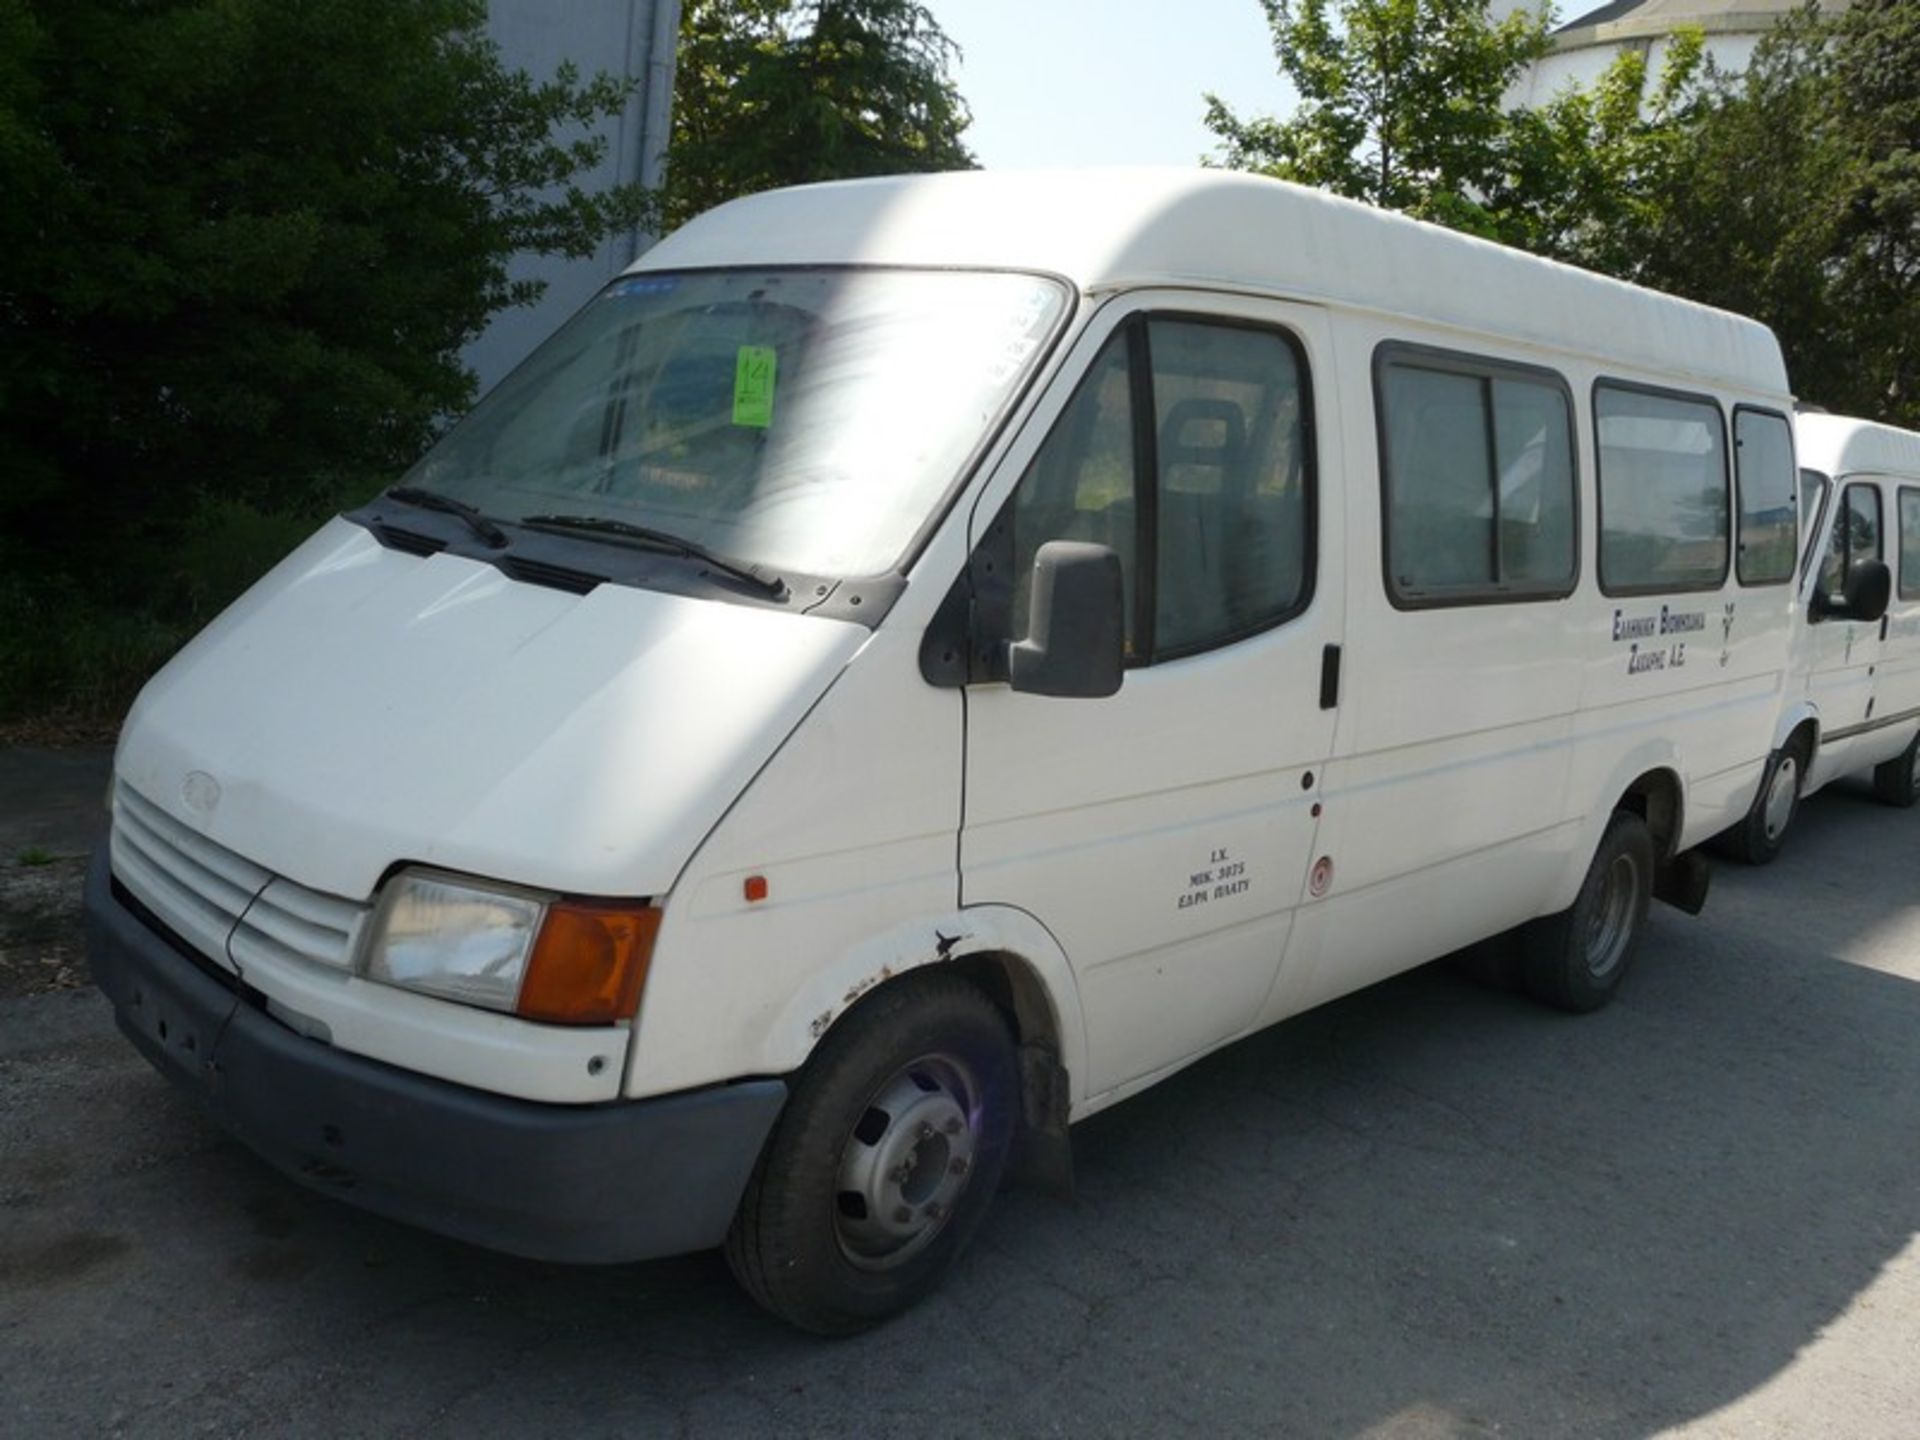 FORD TRANSIT, bus115, diesel, KM 212503, 14+1 seats, REG NBB 8161, Year: 1991 (Located in Greece - - Image 3 of 10